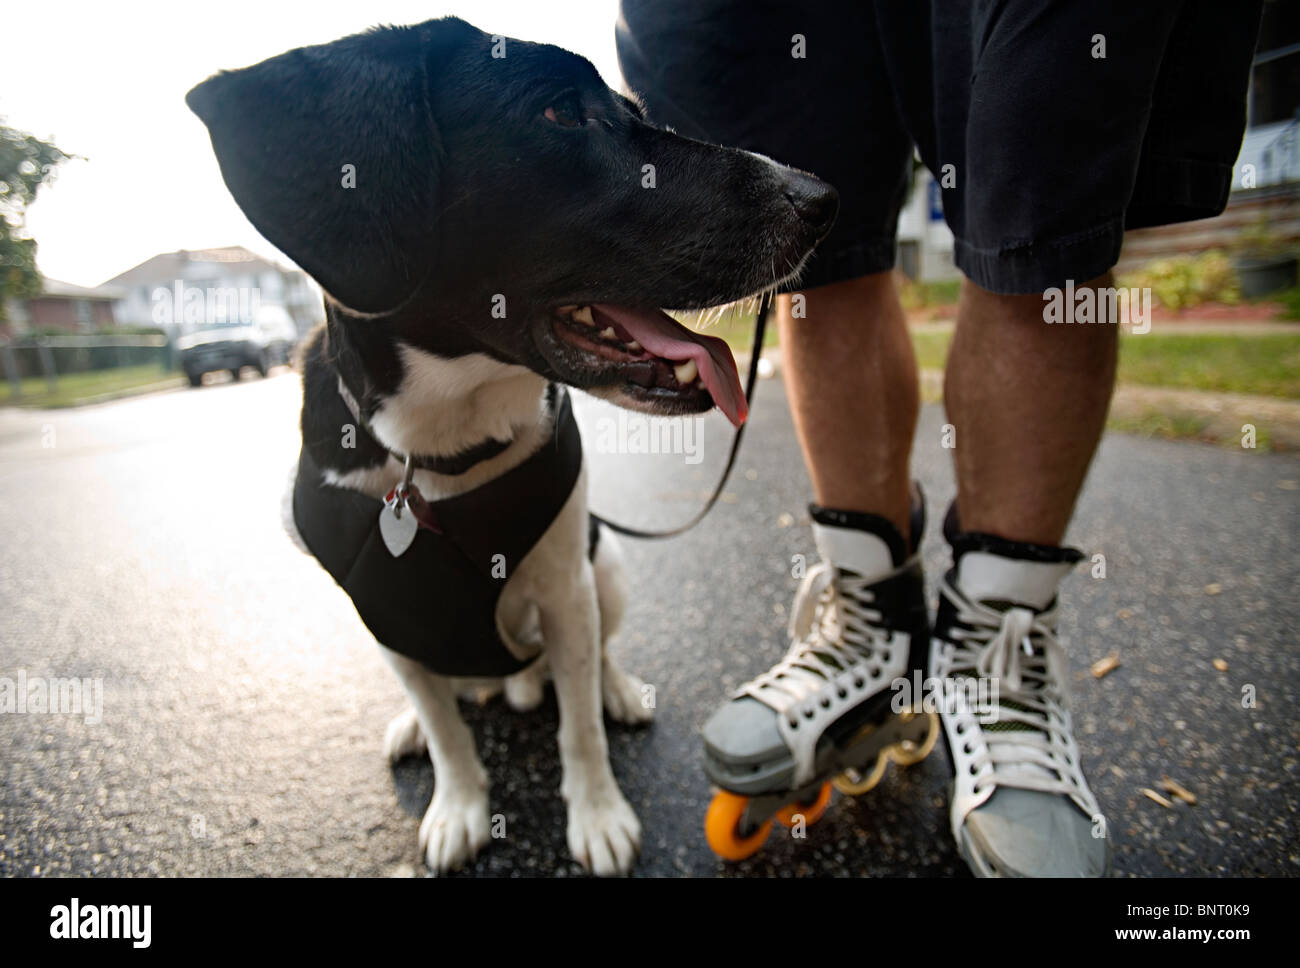 Tired looking dog standing beside man with roller skates. Stock Photo